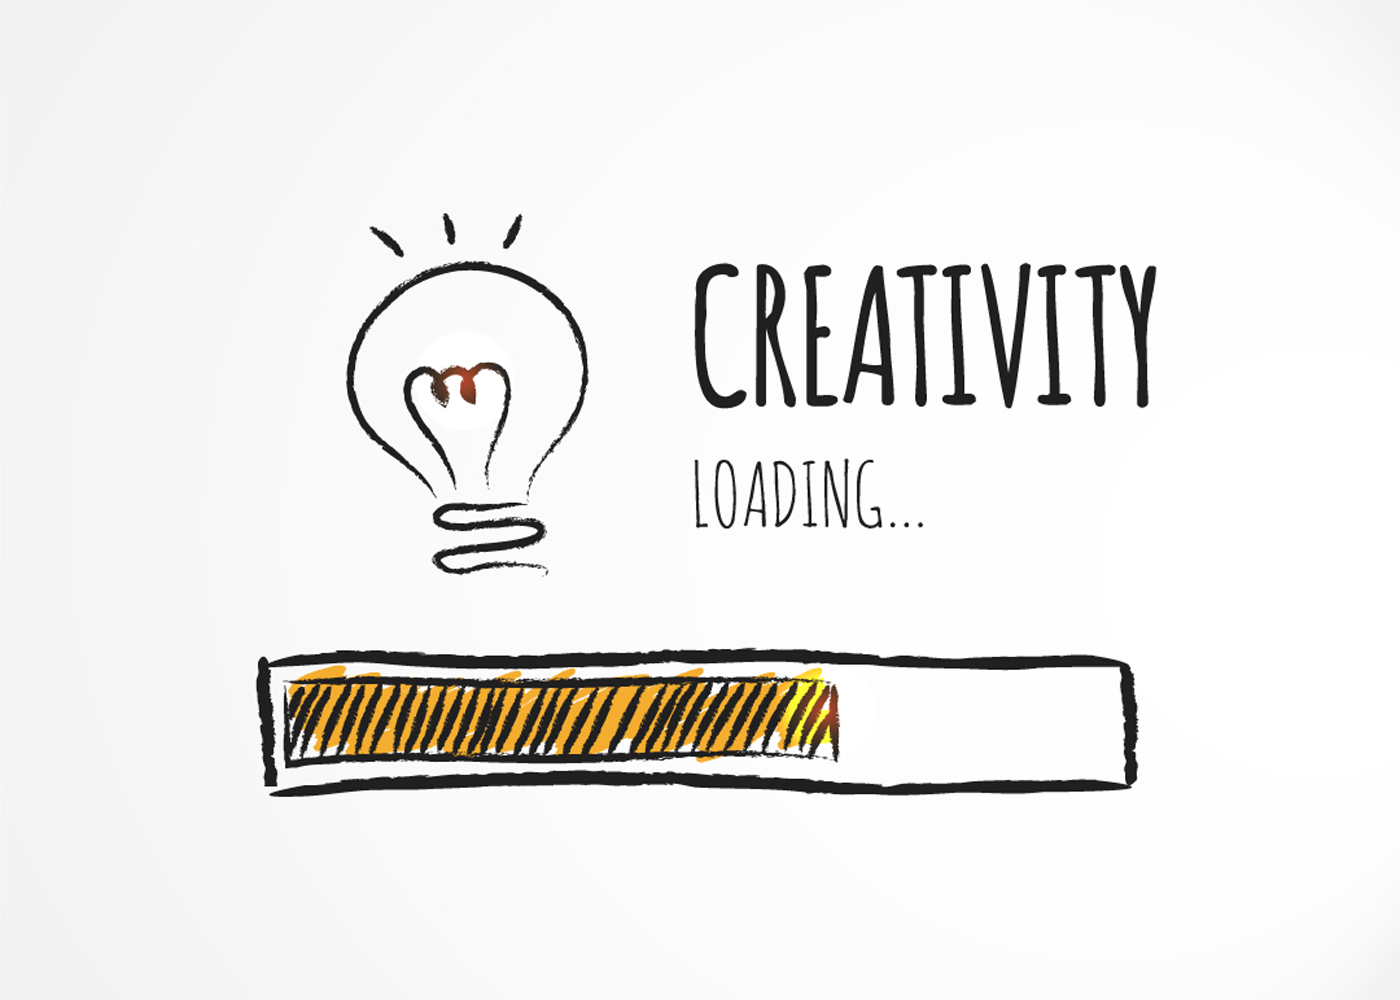 Five Things to Keep in Mind While Hiring a Creative Agency